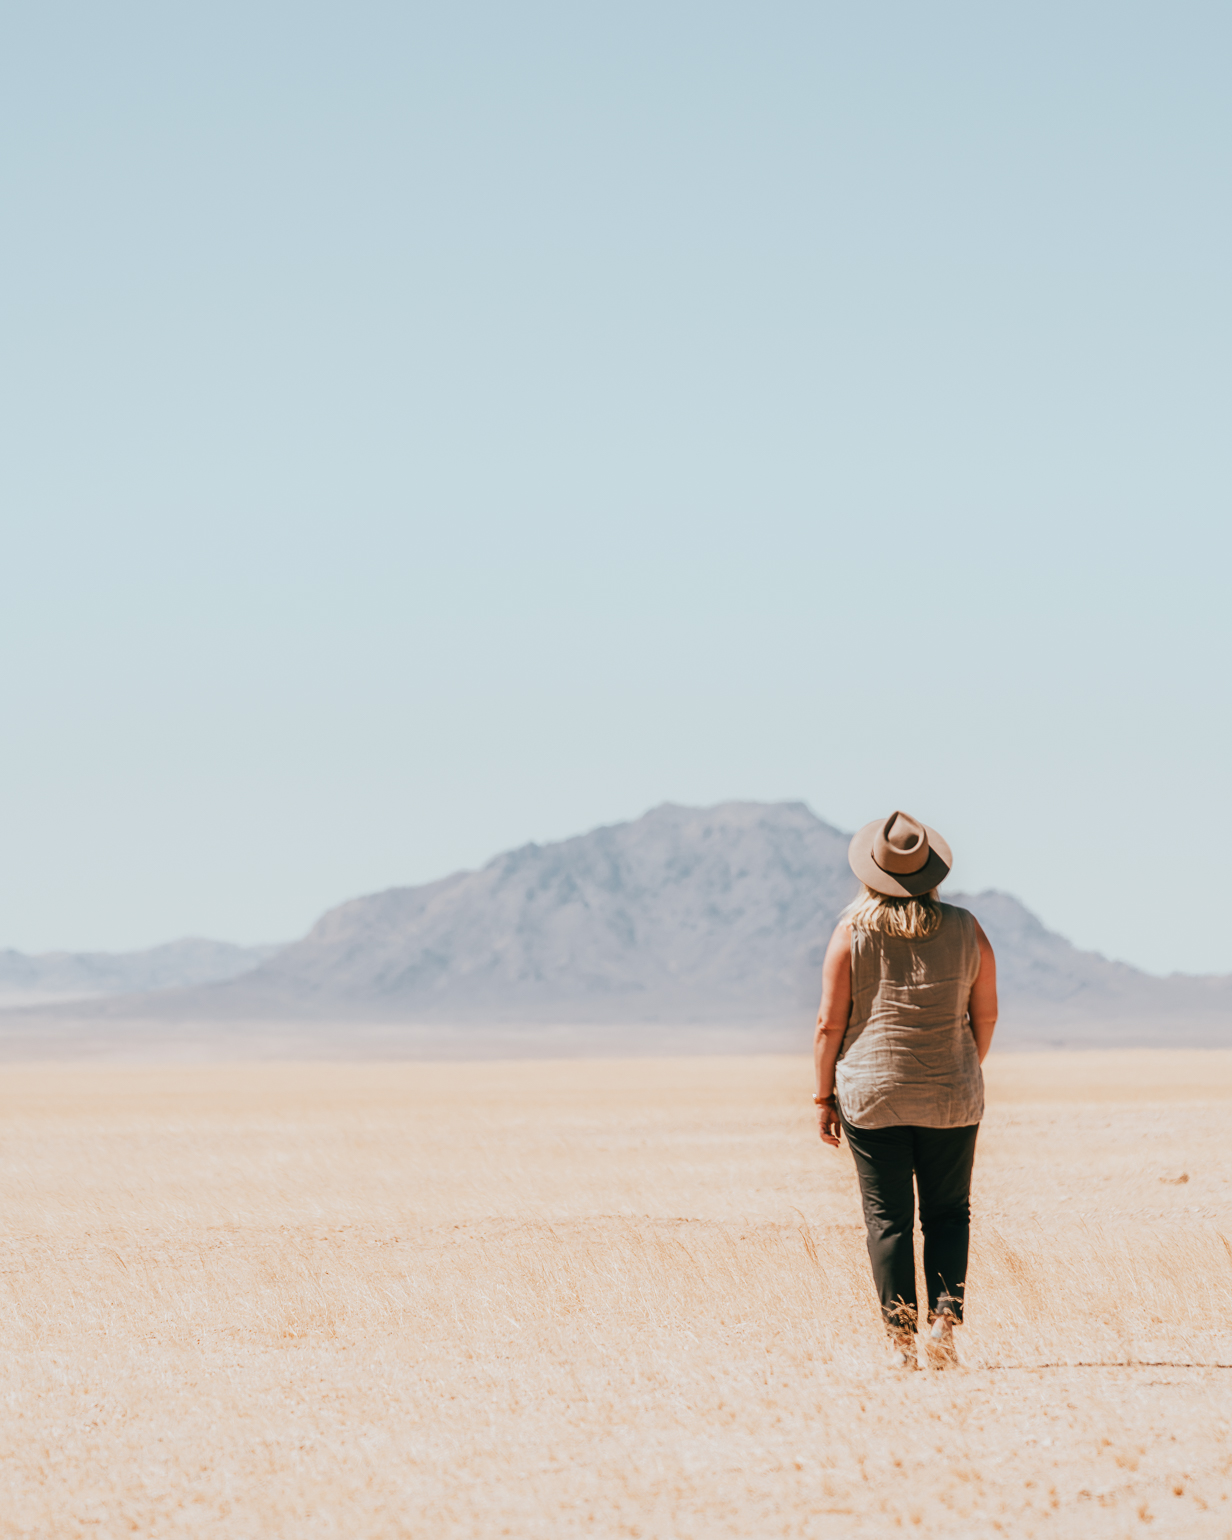 A girl in a hat stands in the desert in Namibia, looking at the distant mountains